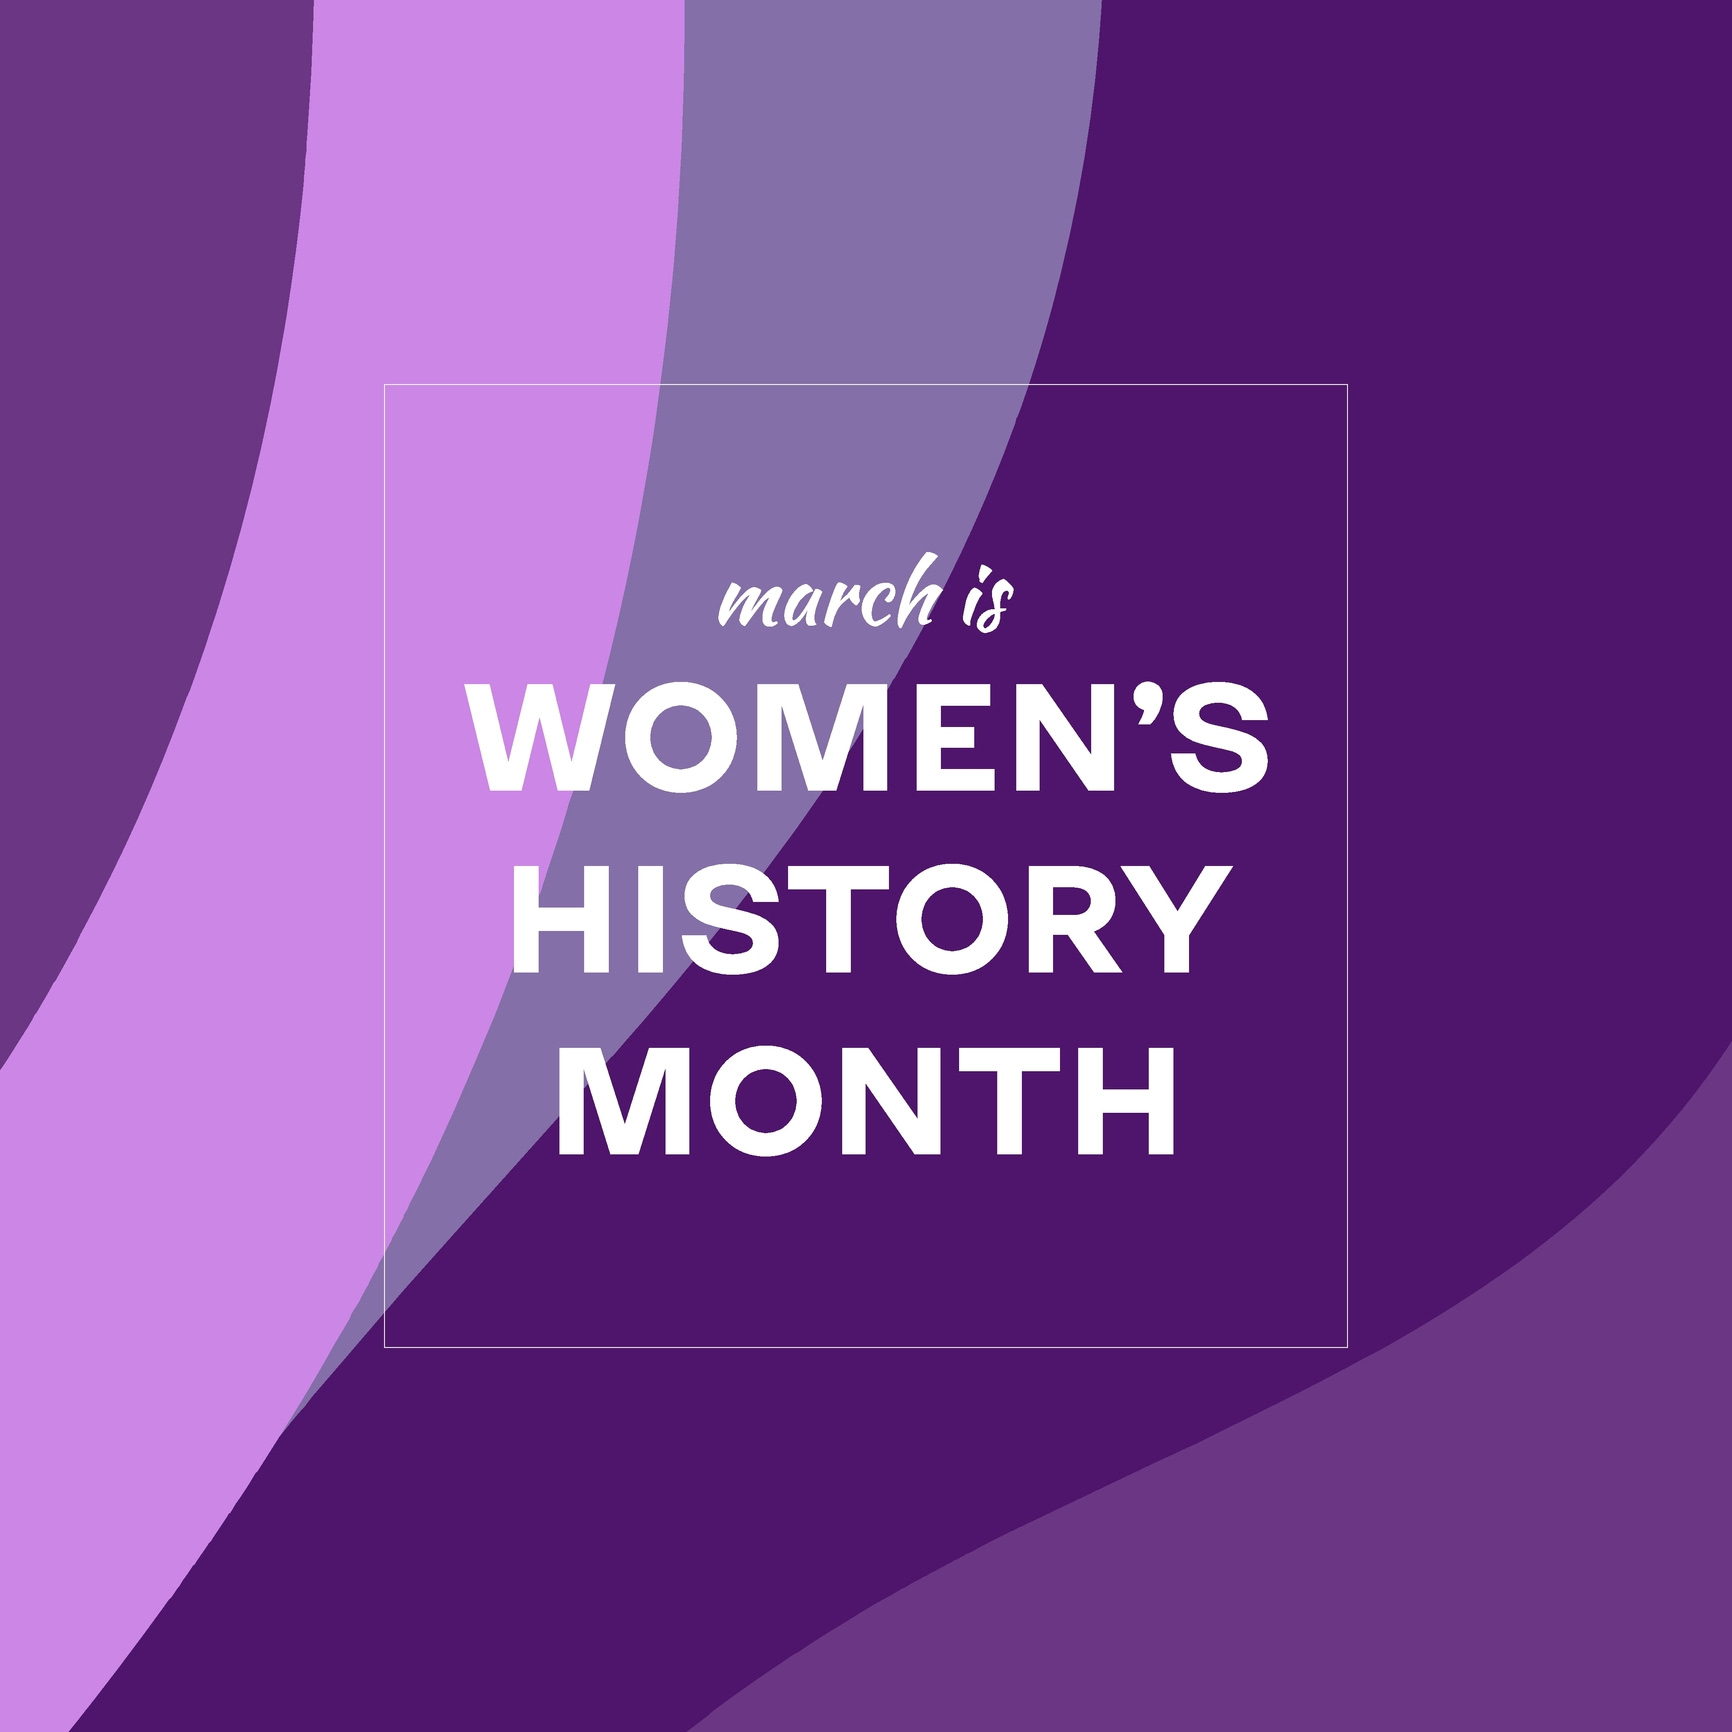 The Significance of Women's History Month